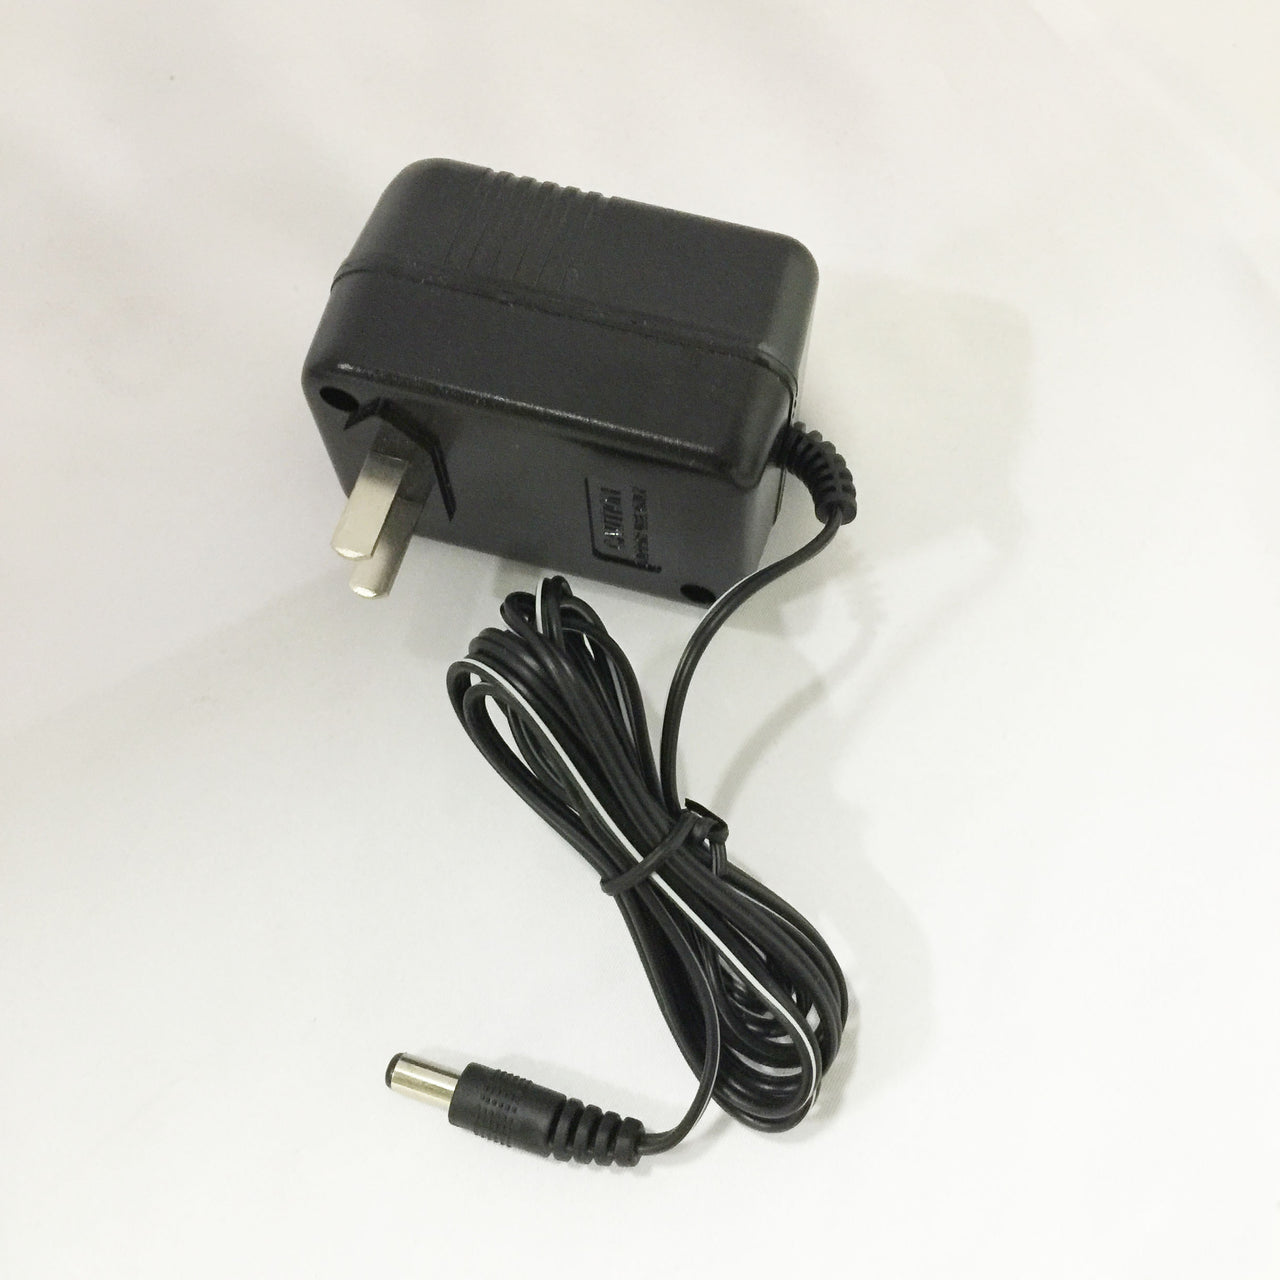 AC Adaptor for Azzota pH meters with input 110 V, output 9V